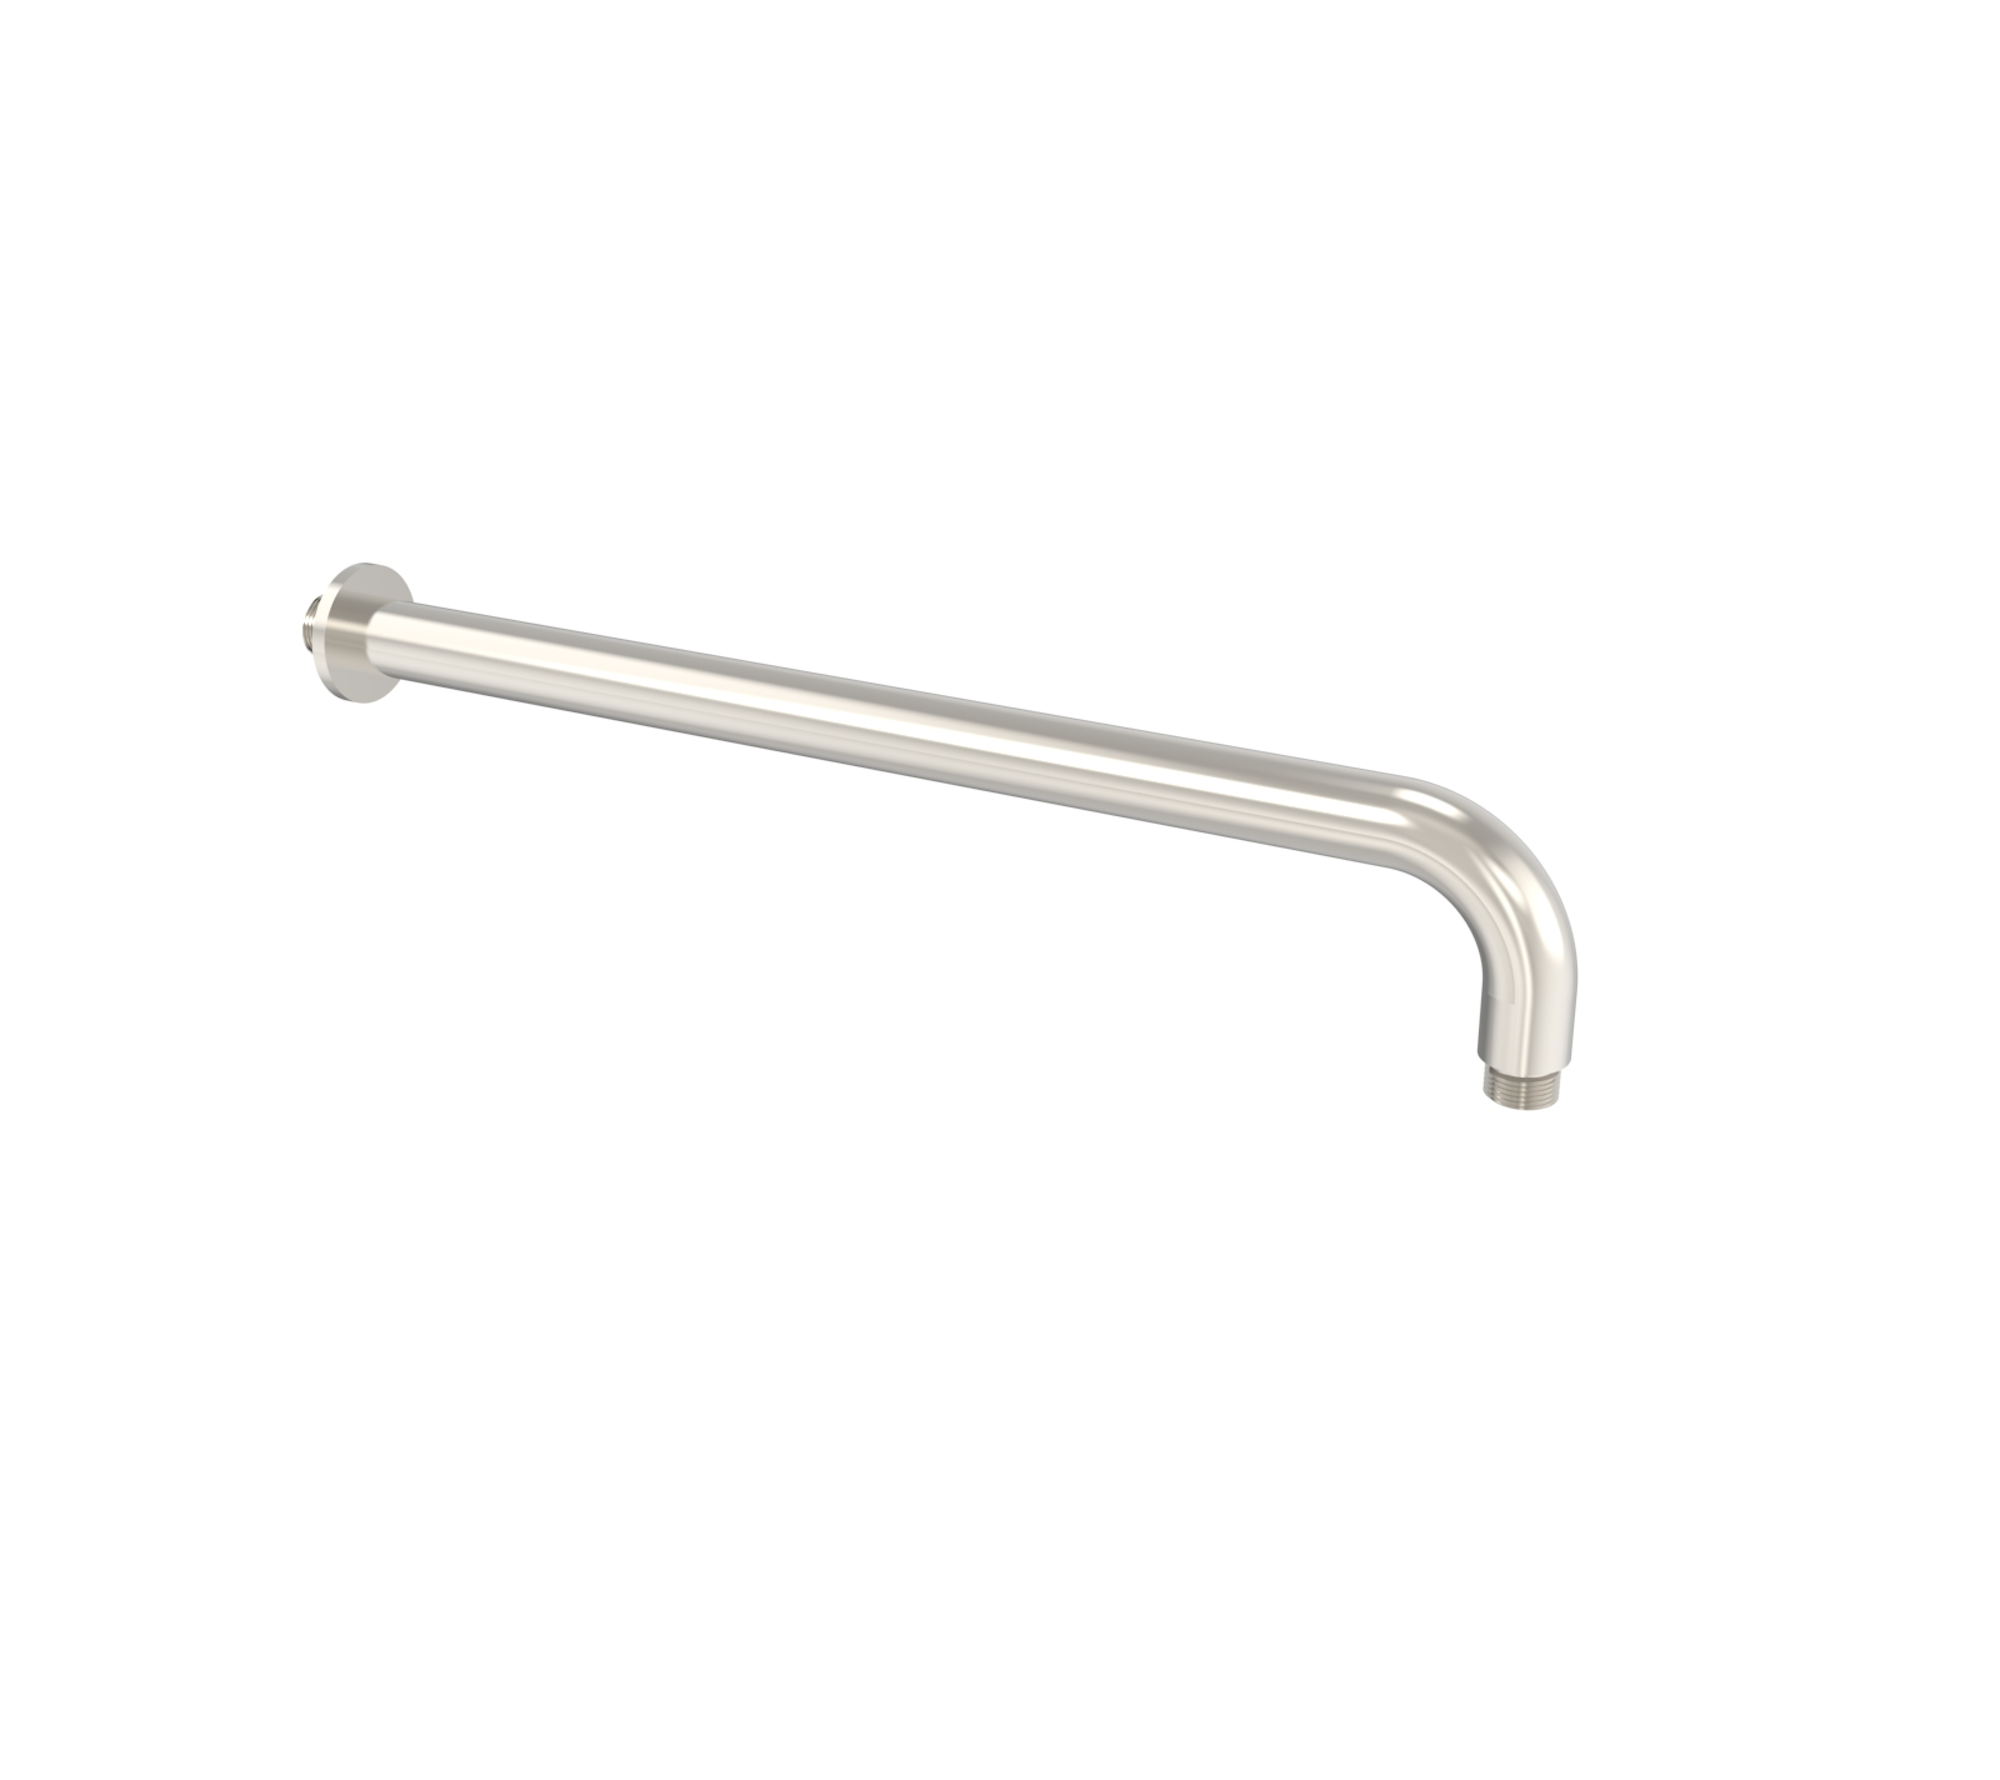 COS 400mm wall mounted shower arm - Brushed Nickel